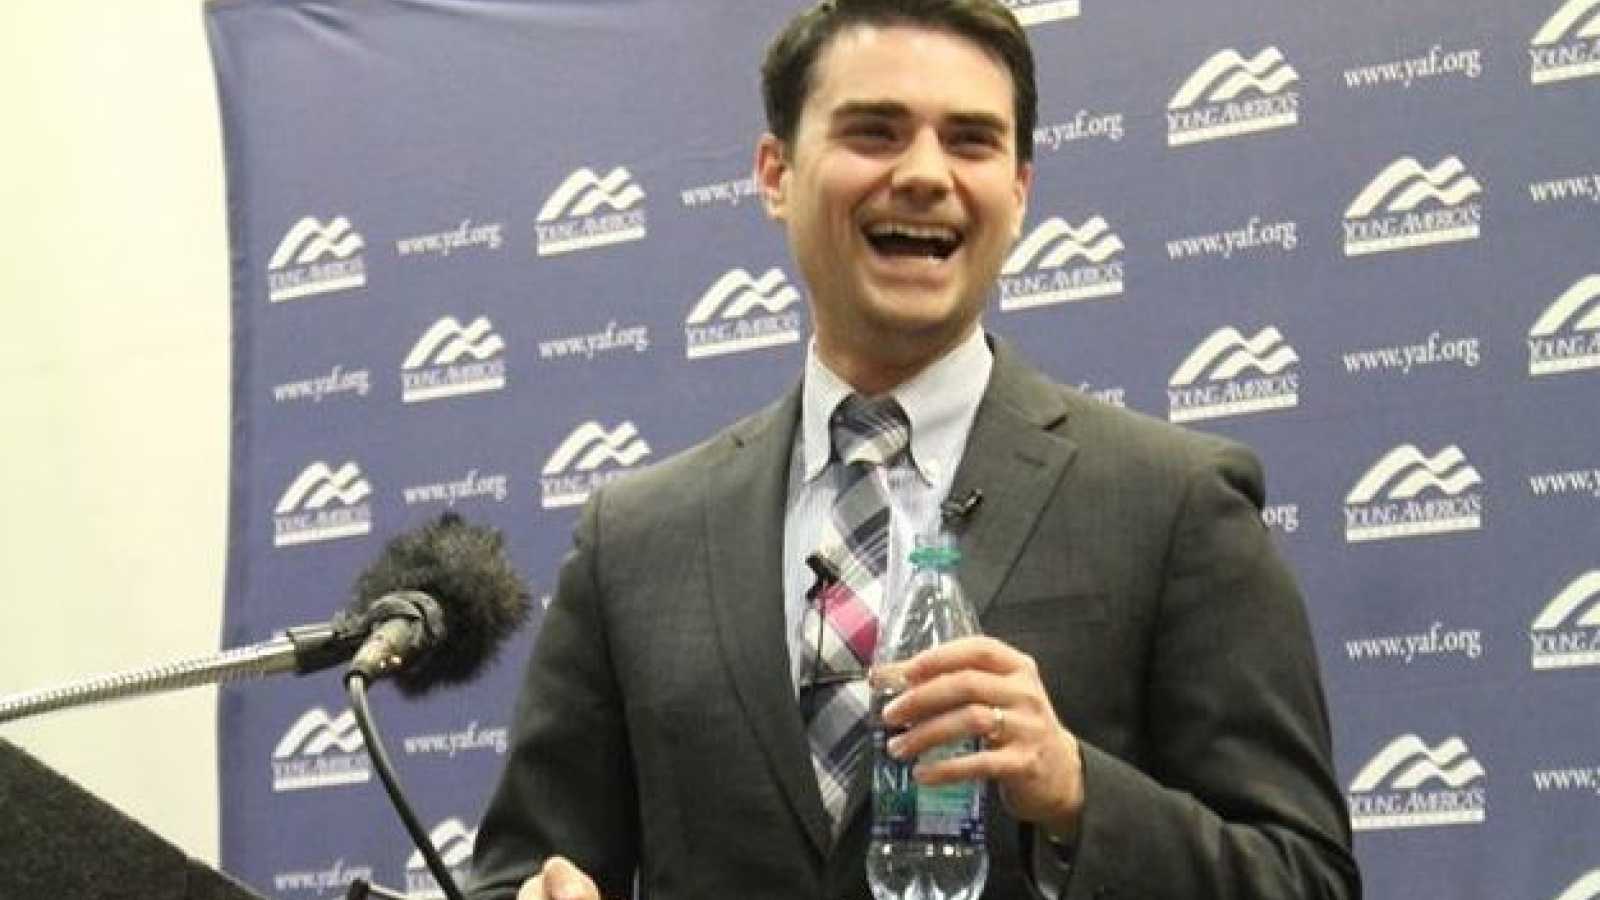 Image: Pro-vax Ben Shapiro FINALLY admits he was wrong about vaccine effectiveness – what took so long?